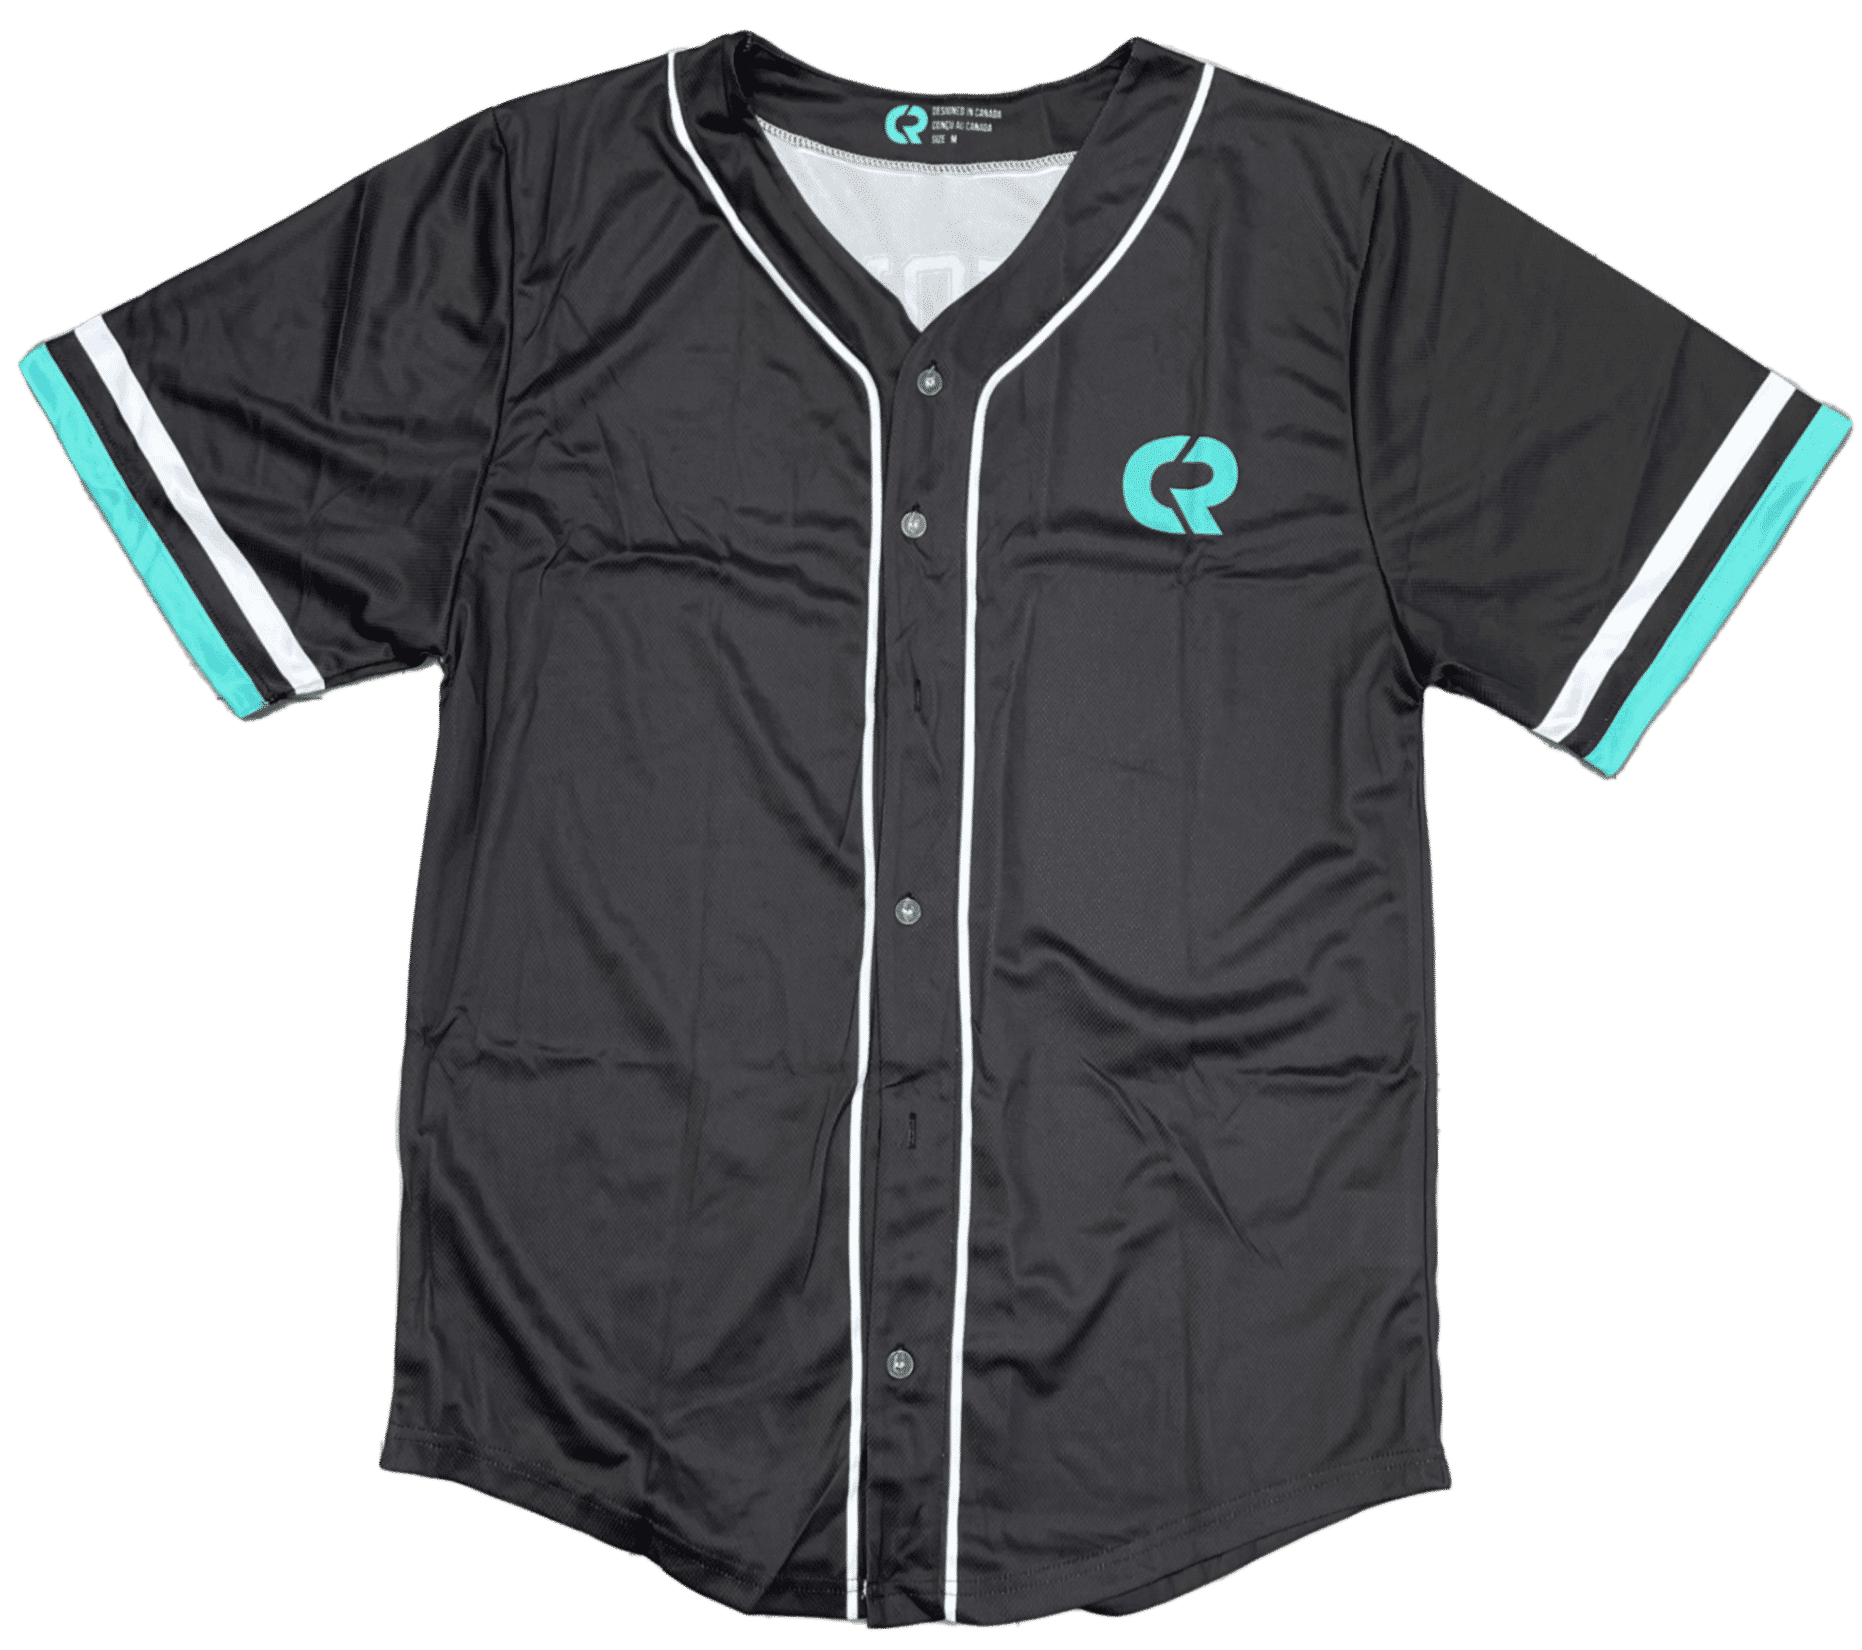 baseball jersey swag outfits - Google Search